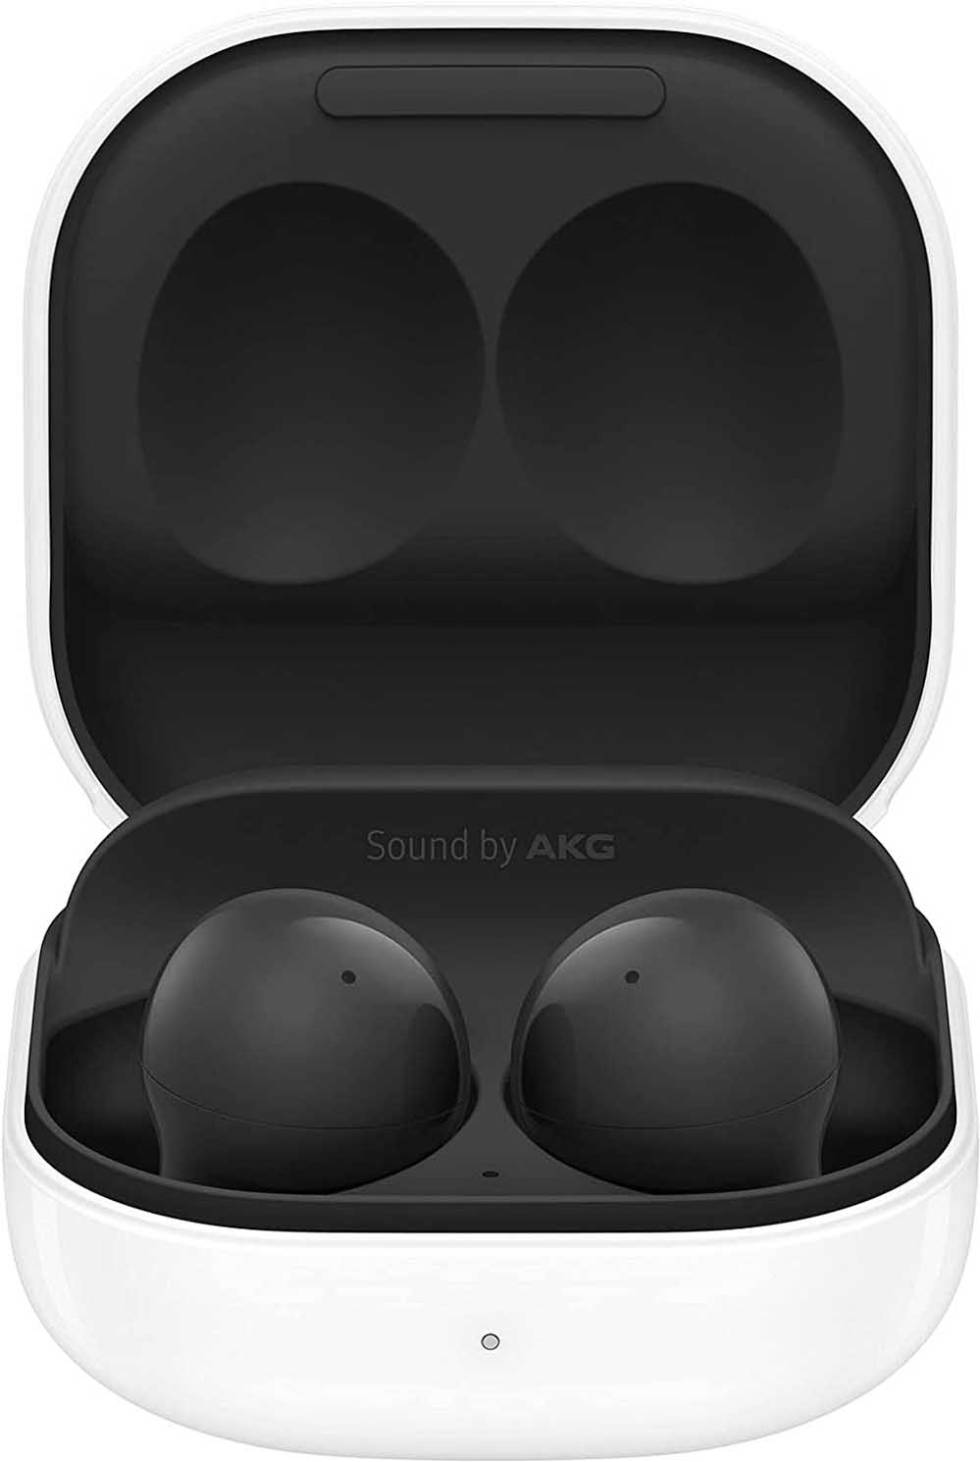 1668684533 191 How to locate Samsung Galaxy Buds headphones if you dont